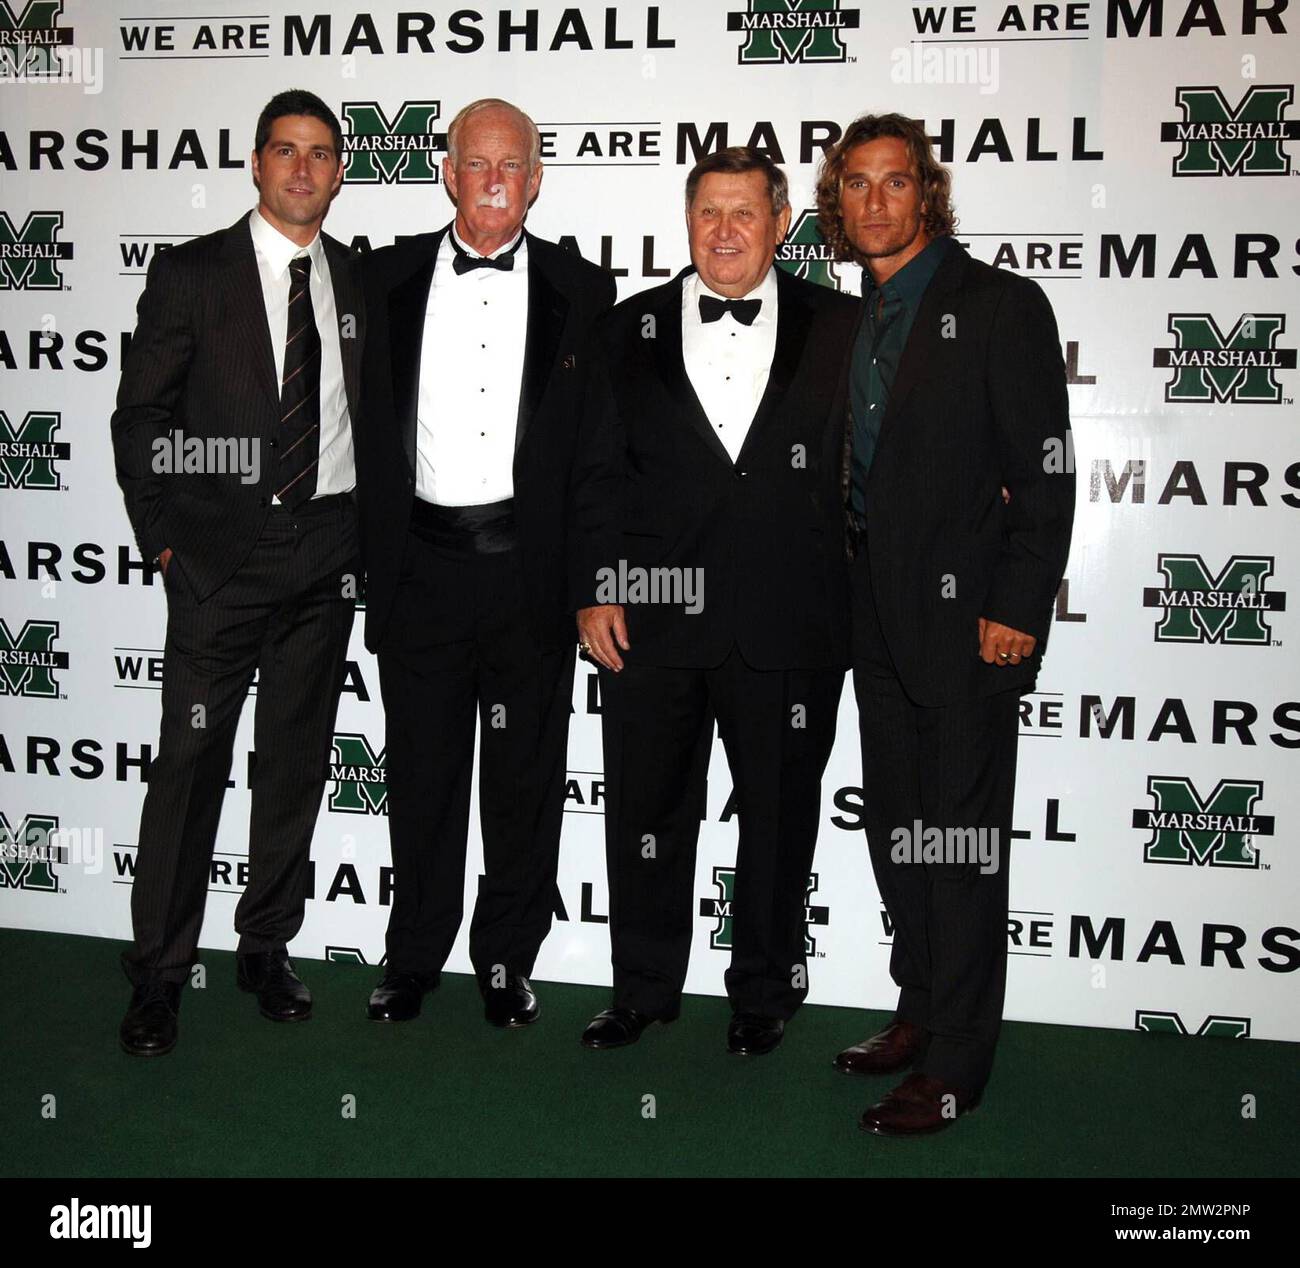 Actor Matthew Fox, left, former Marshall coach Red Dawson, former Marshall  head coach Jack Lengyel, and actor Matthew McConaughey set up a photo op on  the green carpet during the premiere of 